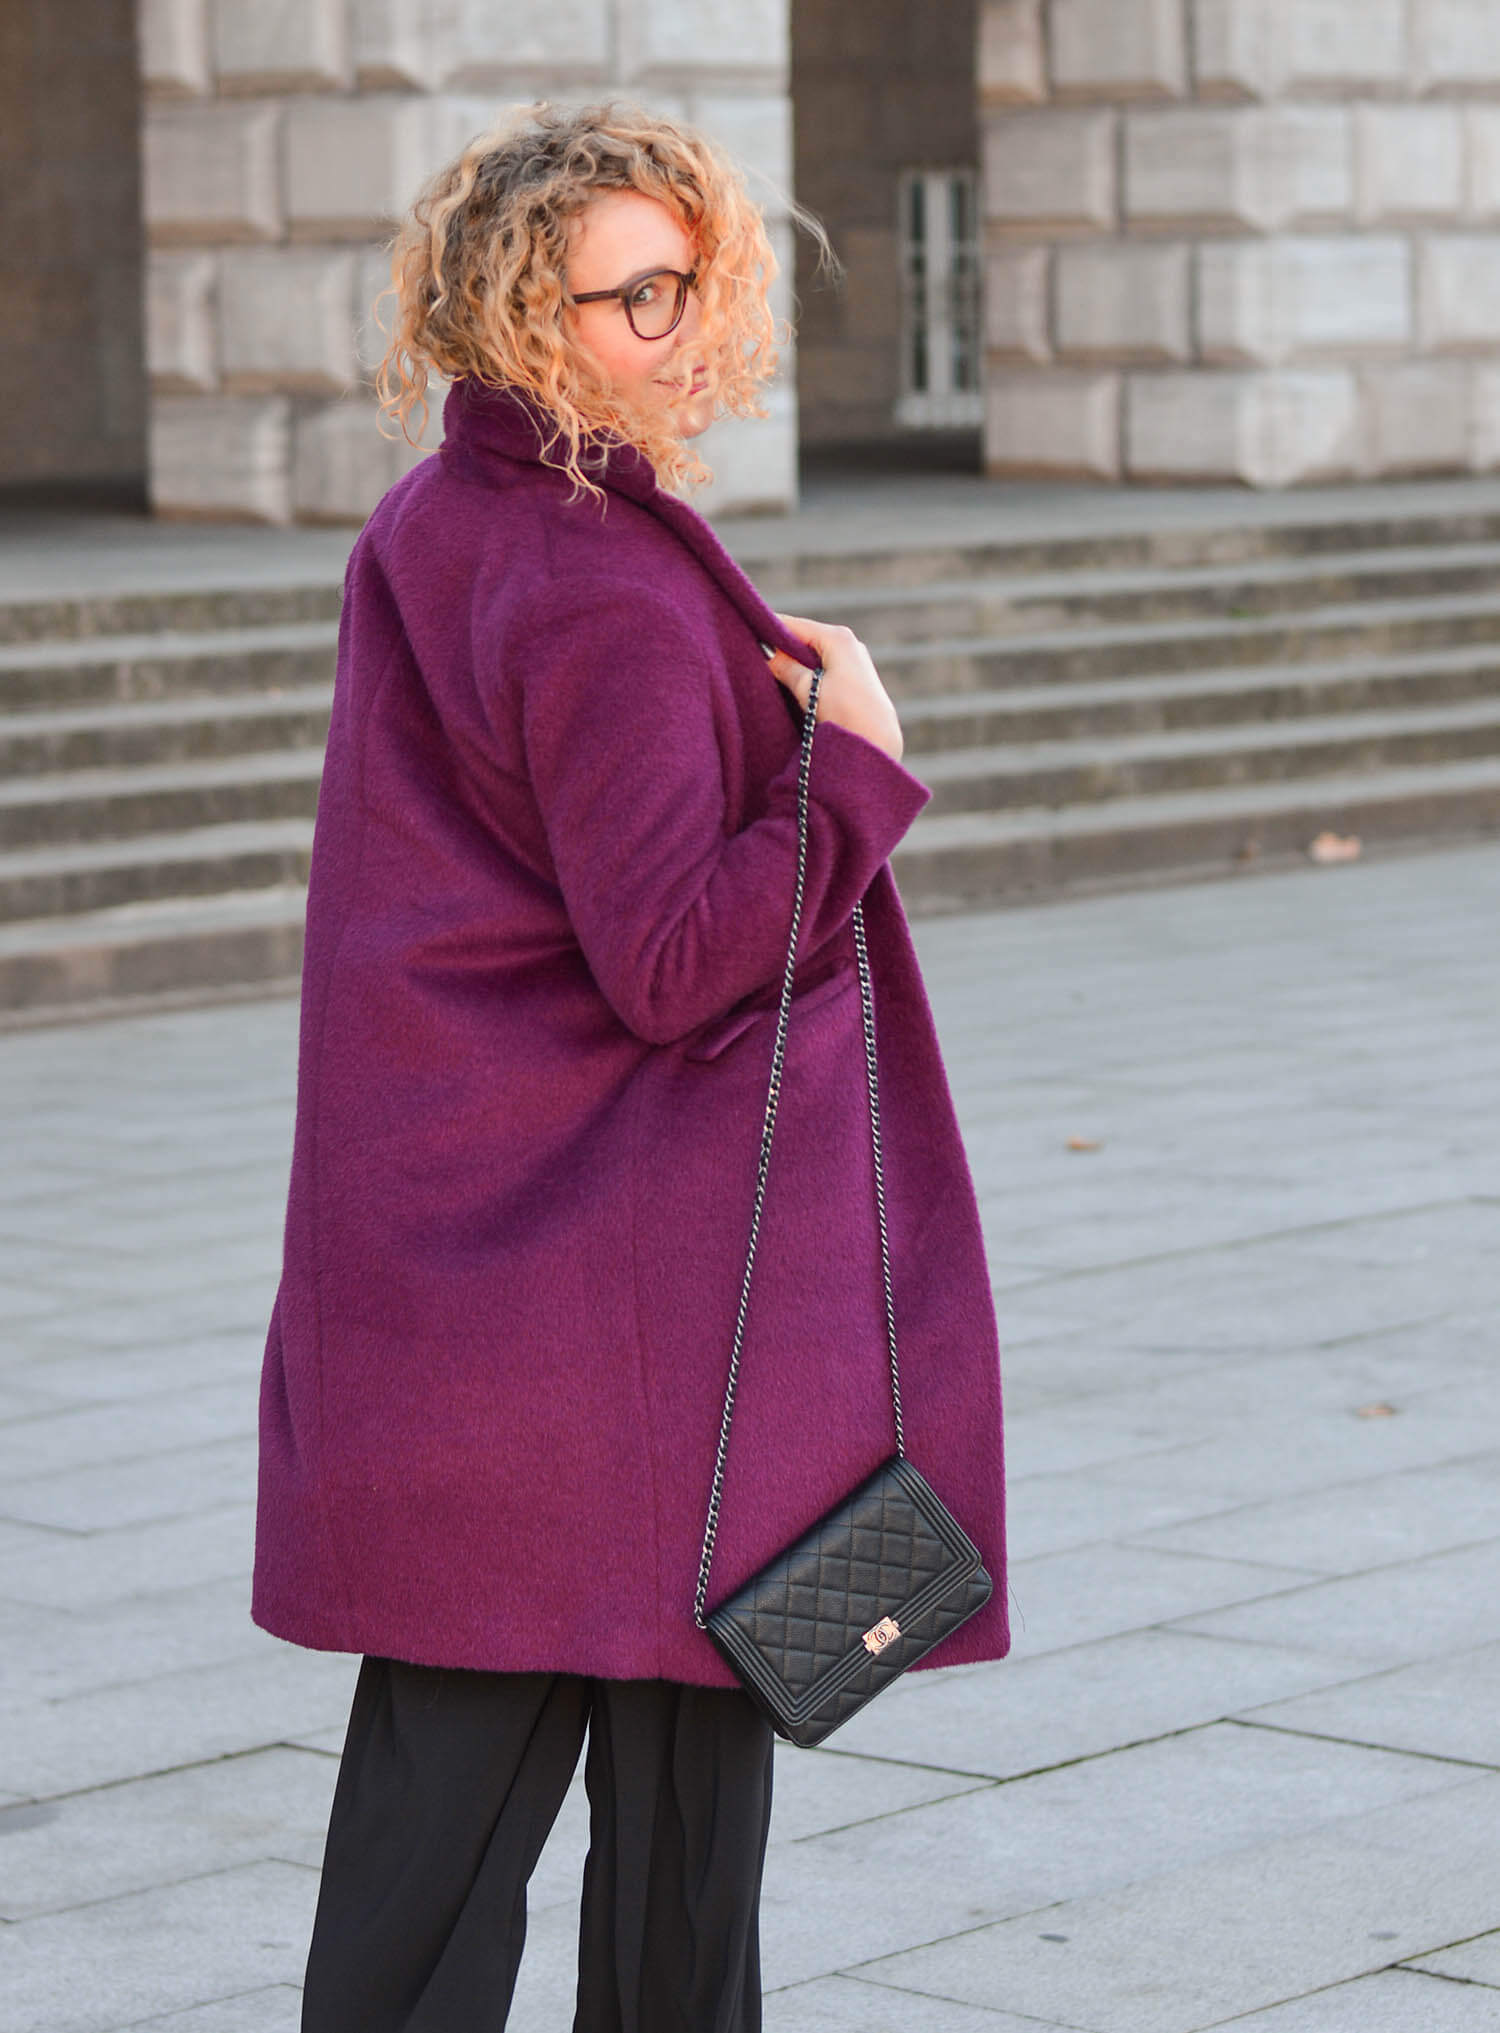 culottes-in-winter-purple-wool-coat-tweed-jacket-sock-boots-kationette-fashionblogger